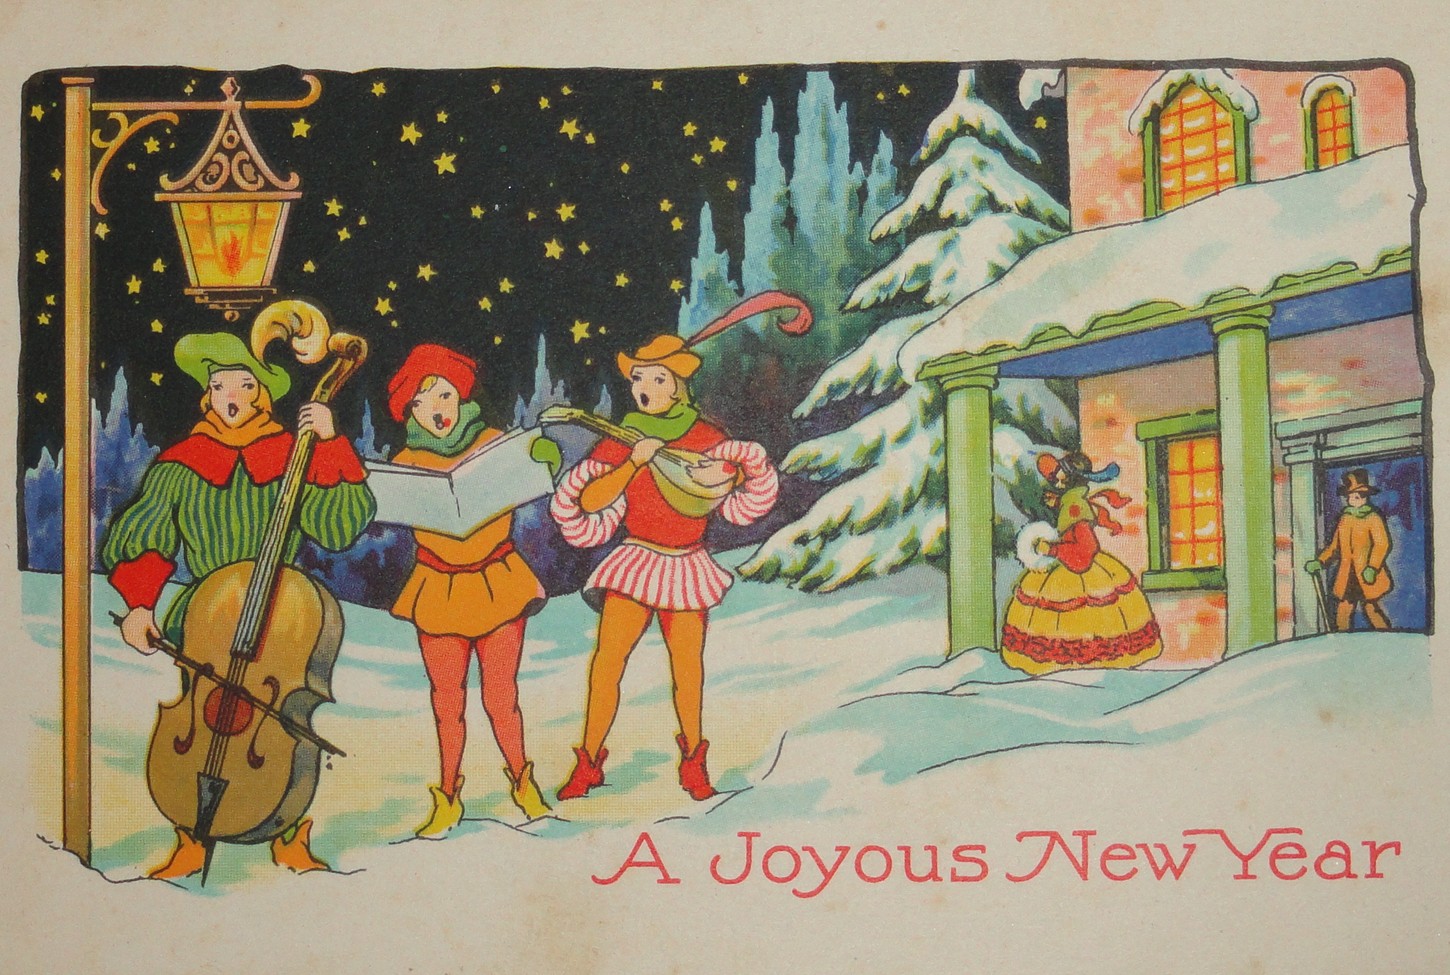 This free vintage image features musicians singing in the New Year near a s...